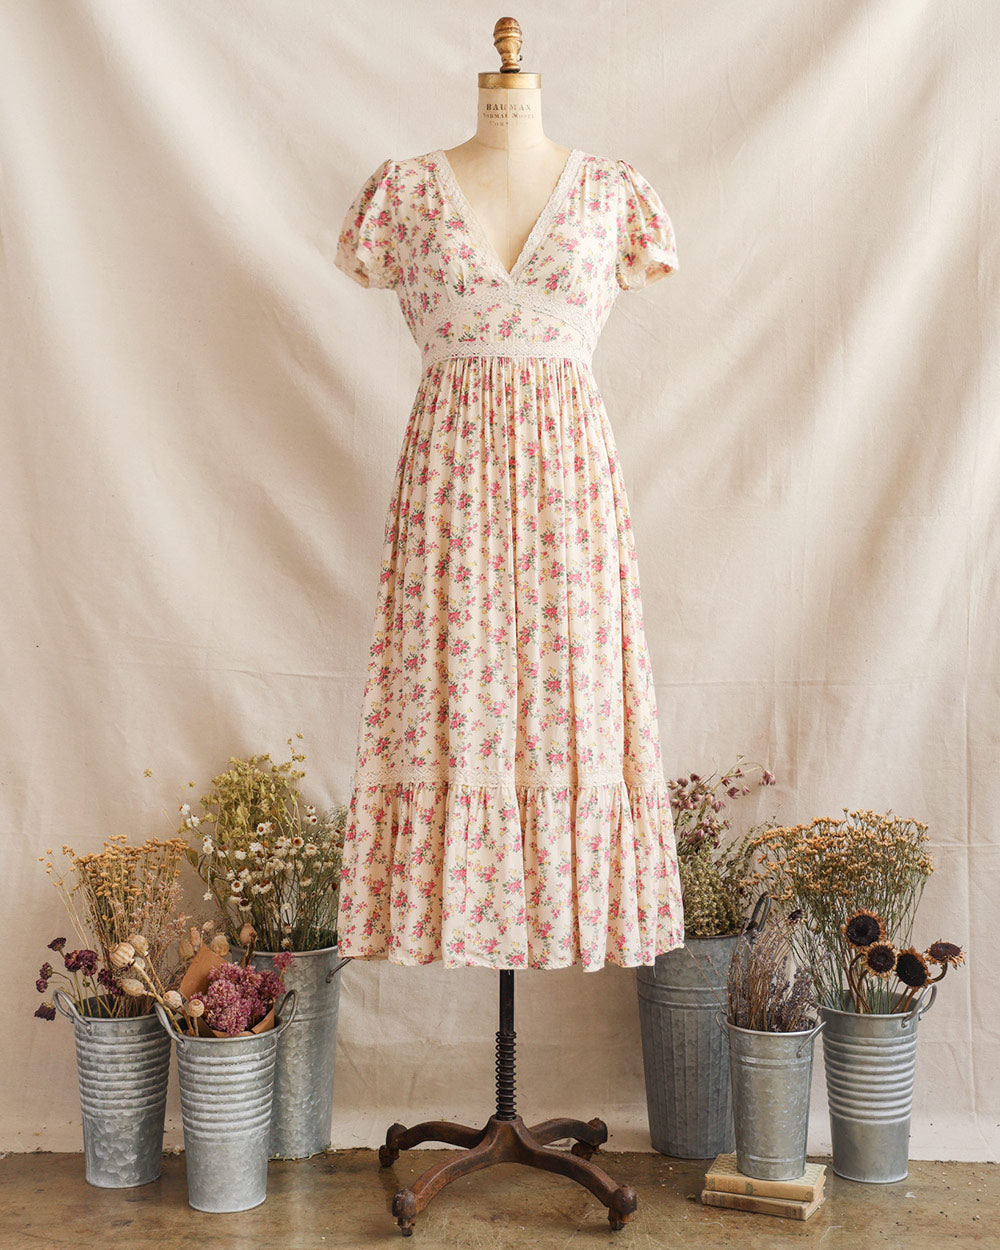 Tend to Roses Dress